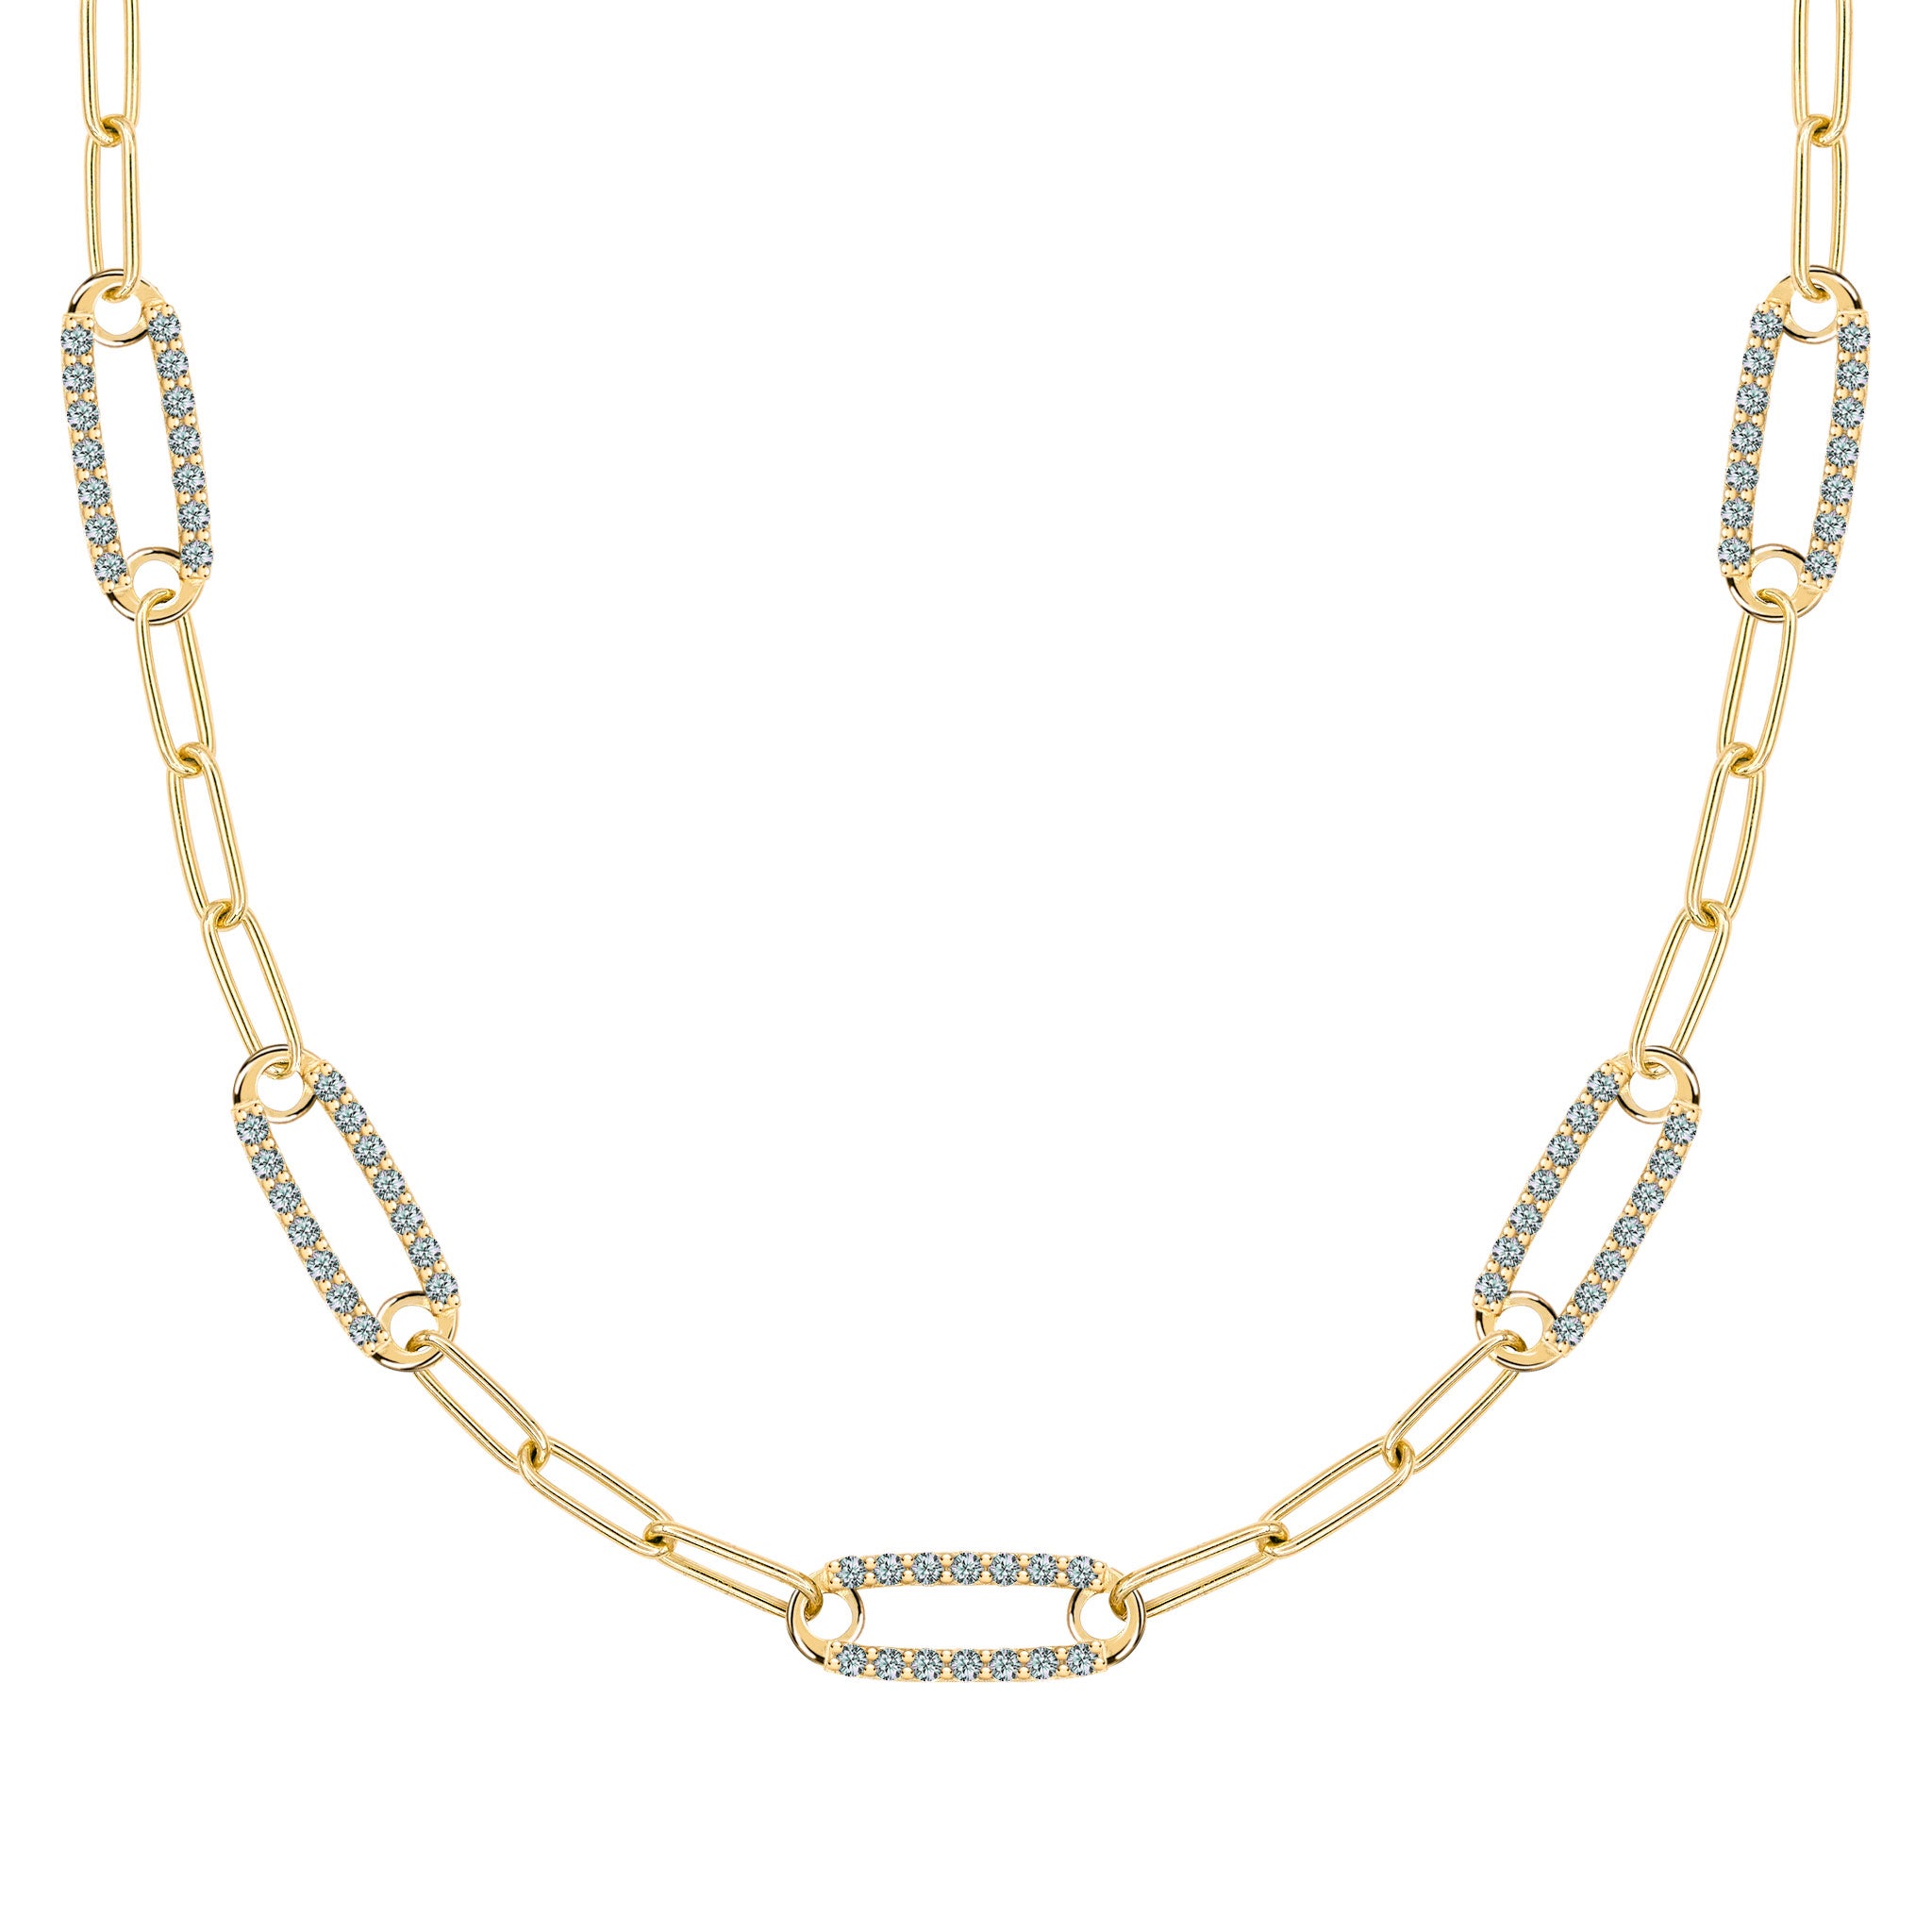 Diamond Carabiner Necklace 20 Inches / 14K Yellow Gold